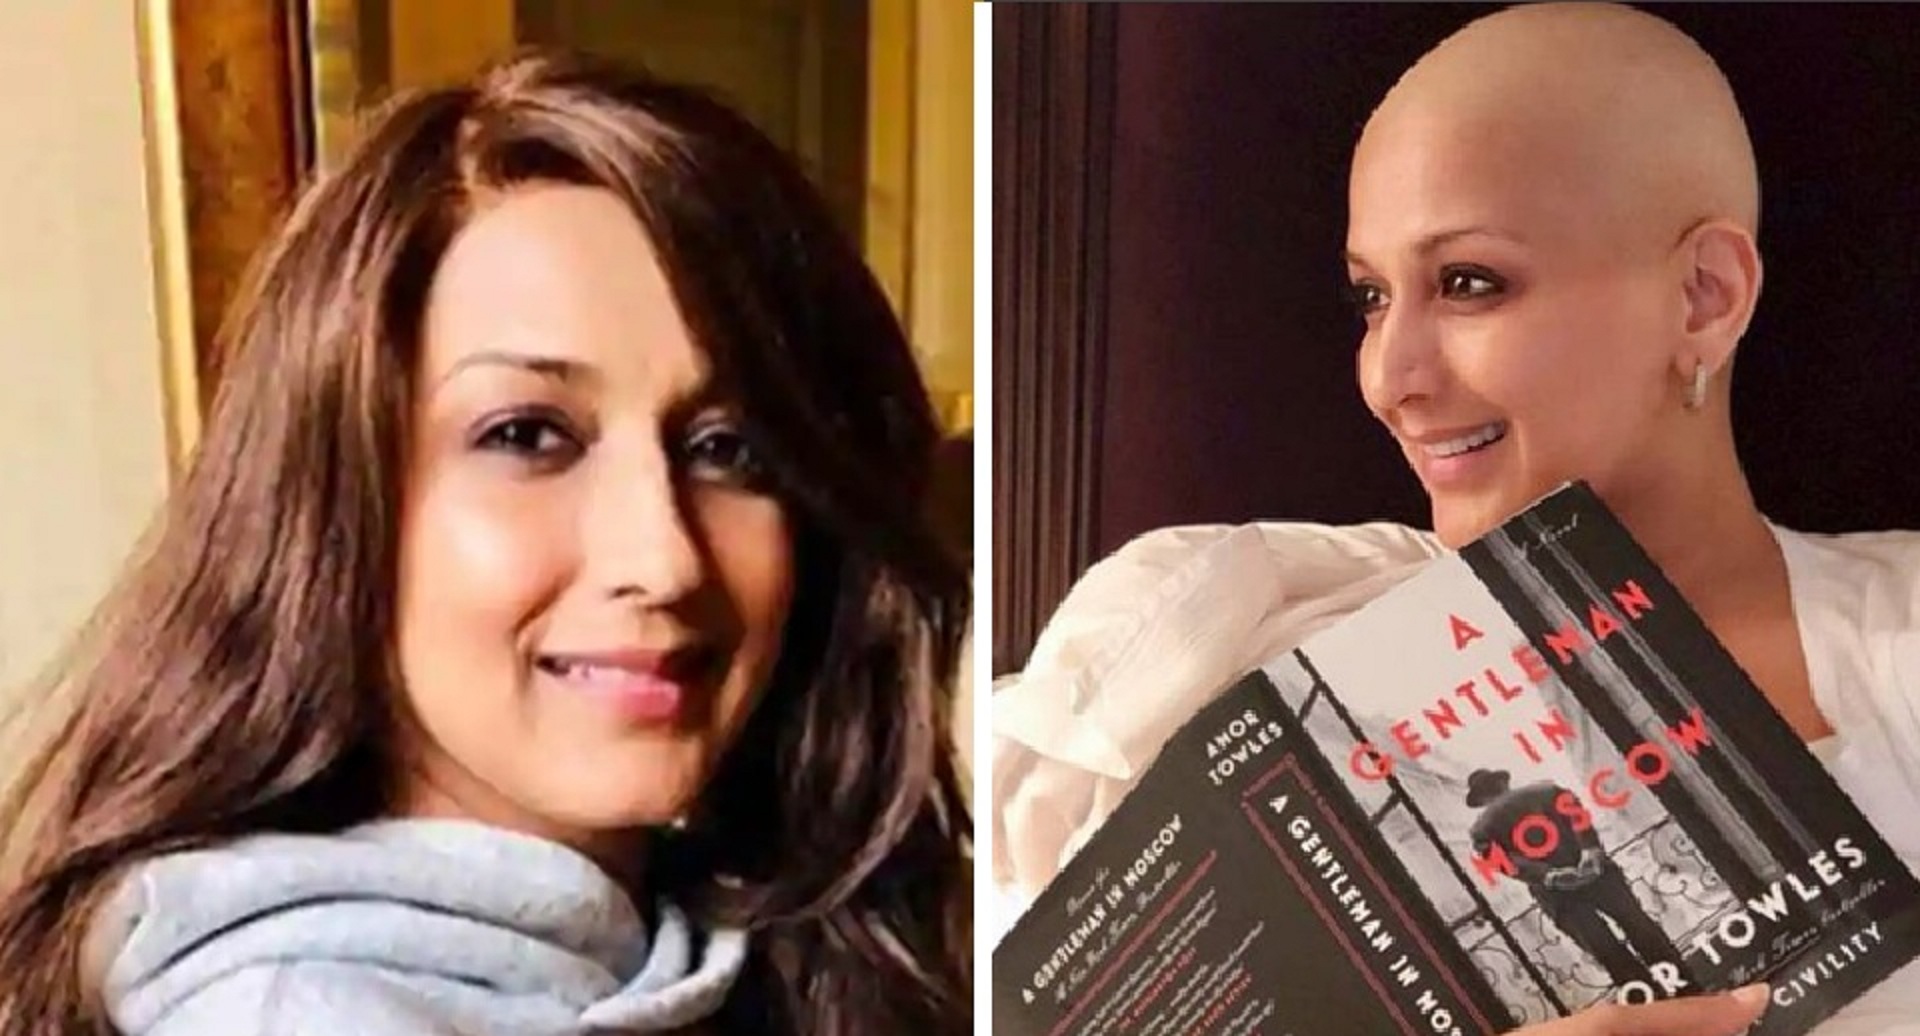 Battling Cancer, Sonali Bendre shares pic wearing a wig and a heartfelt message